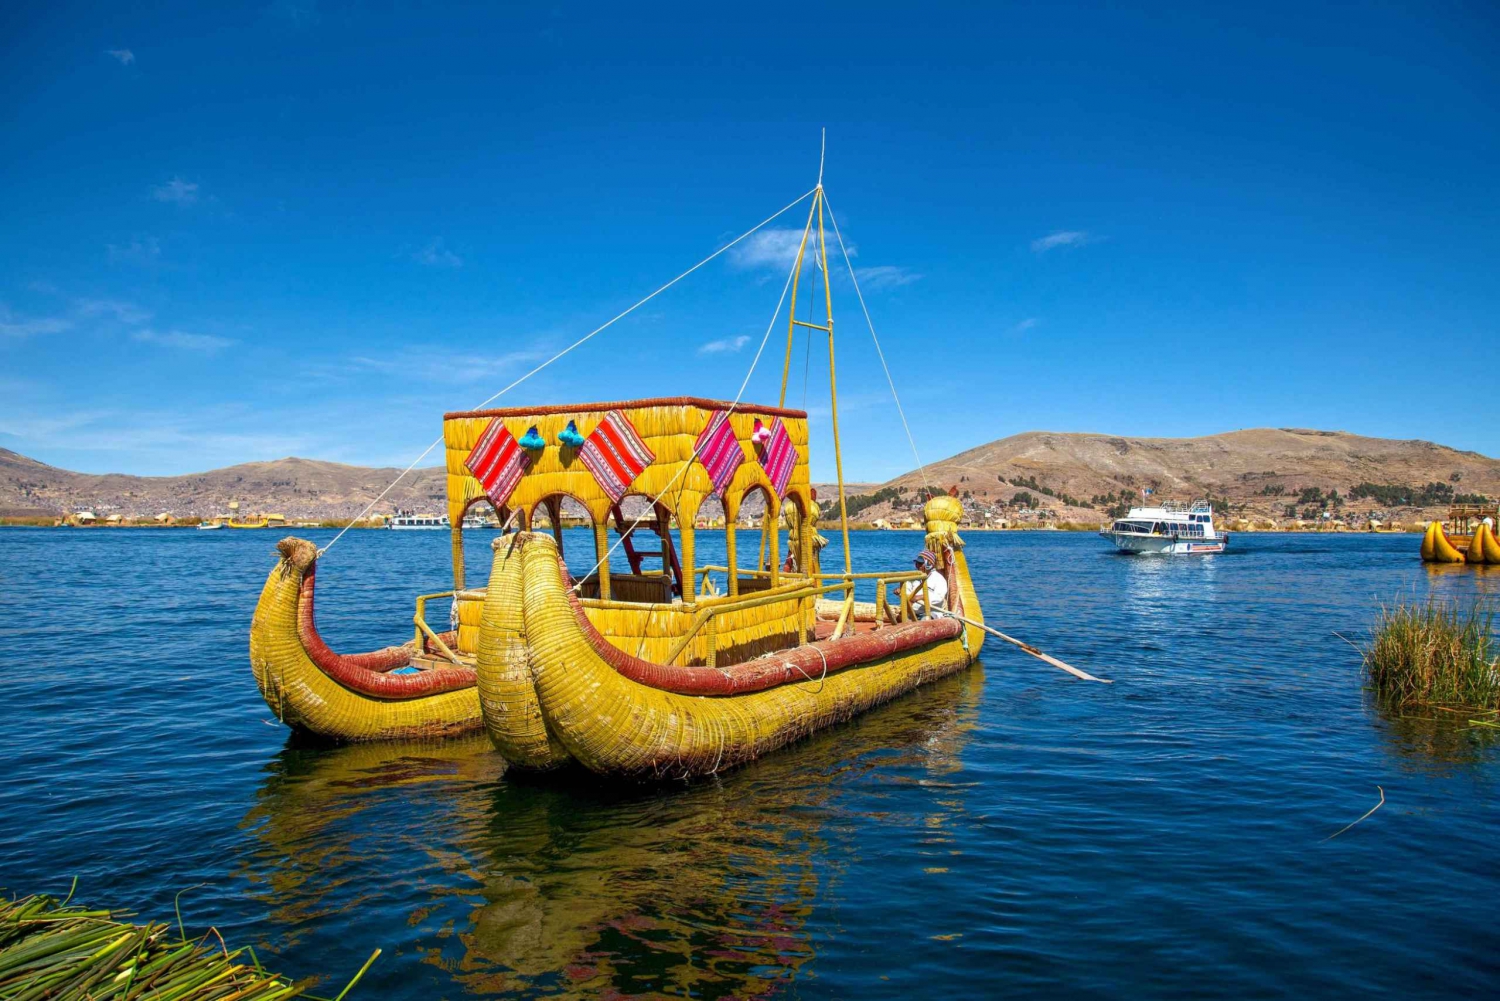 Uros and Taquile Island Boat Trip from Puno